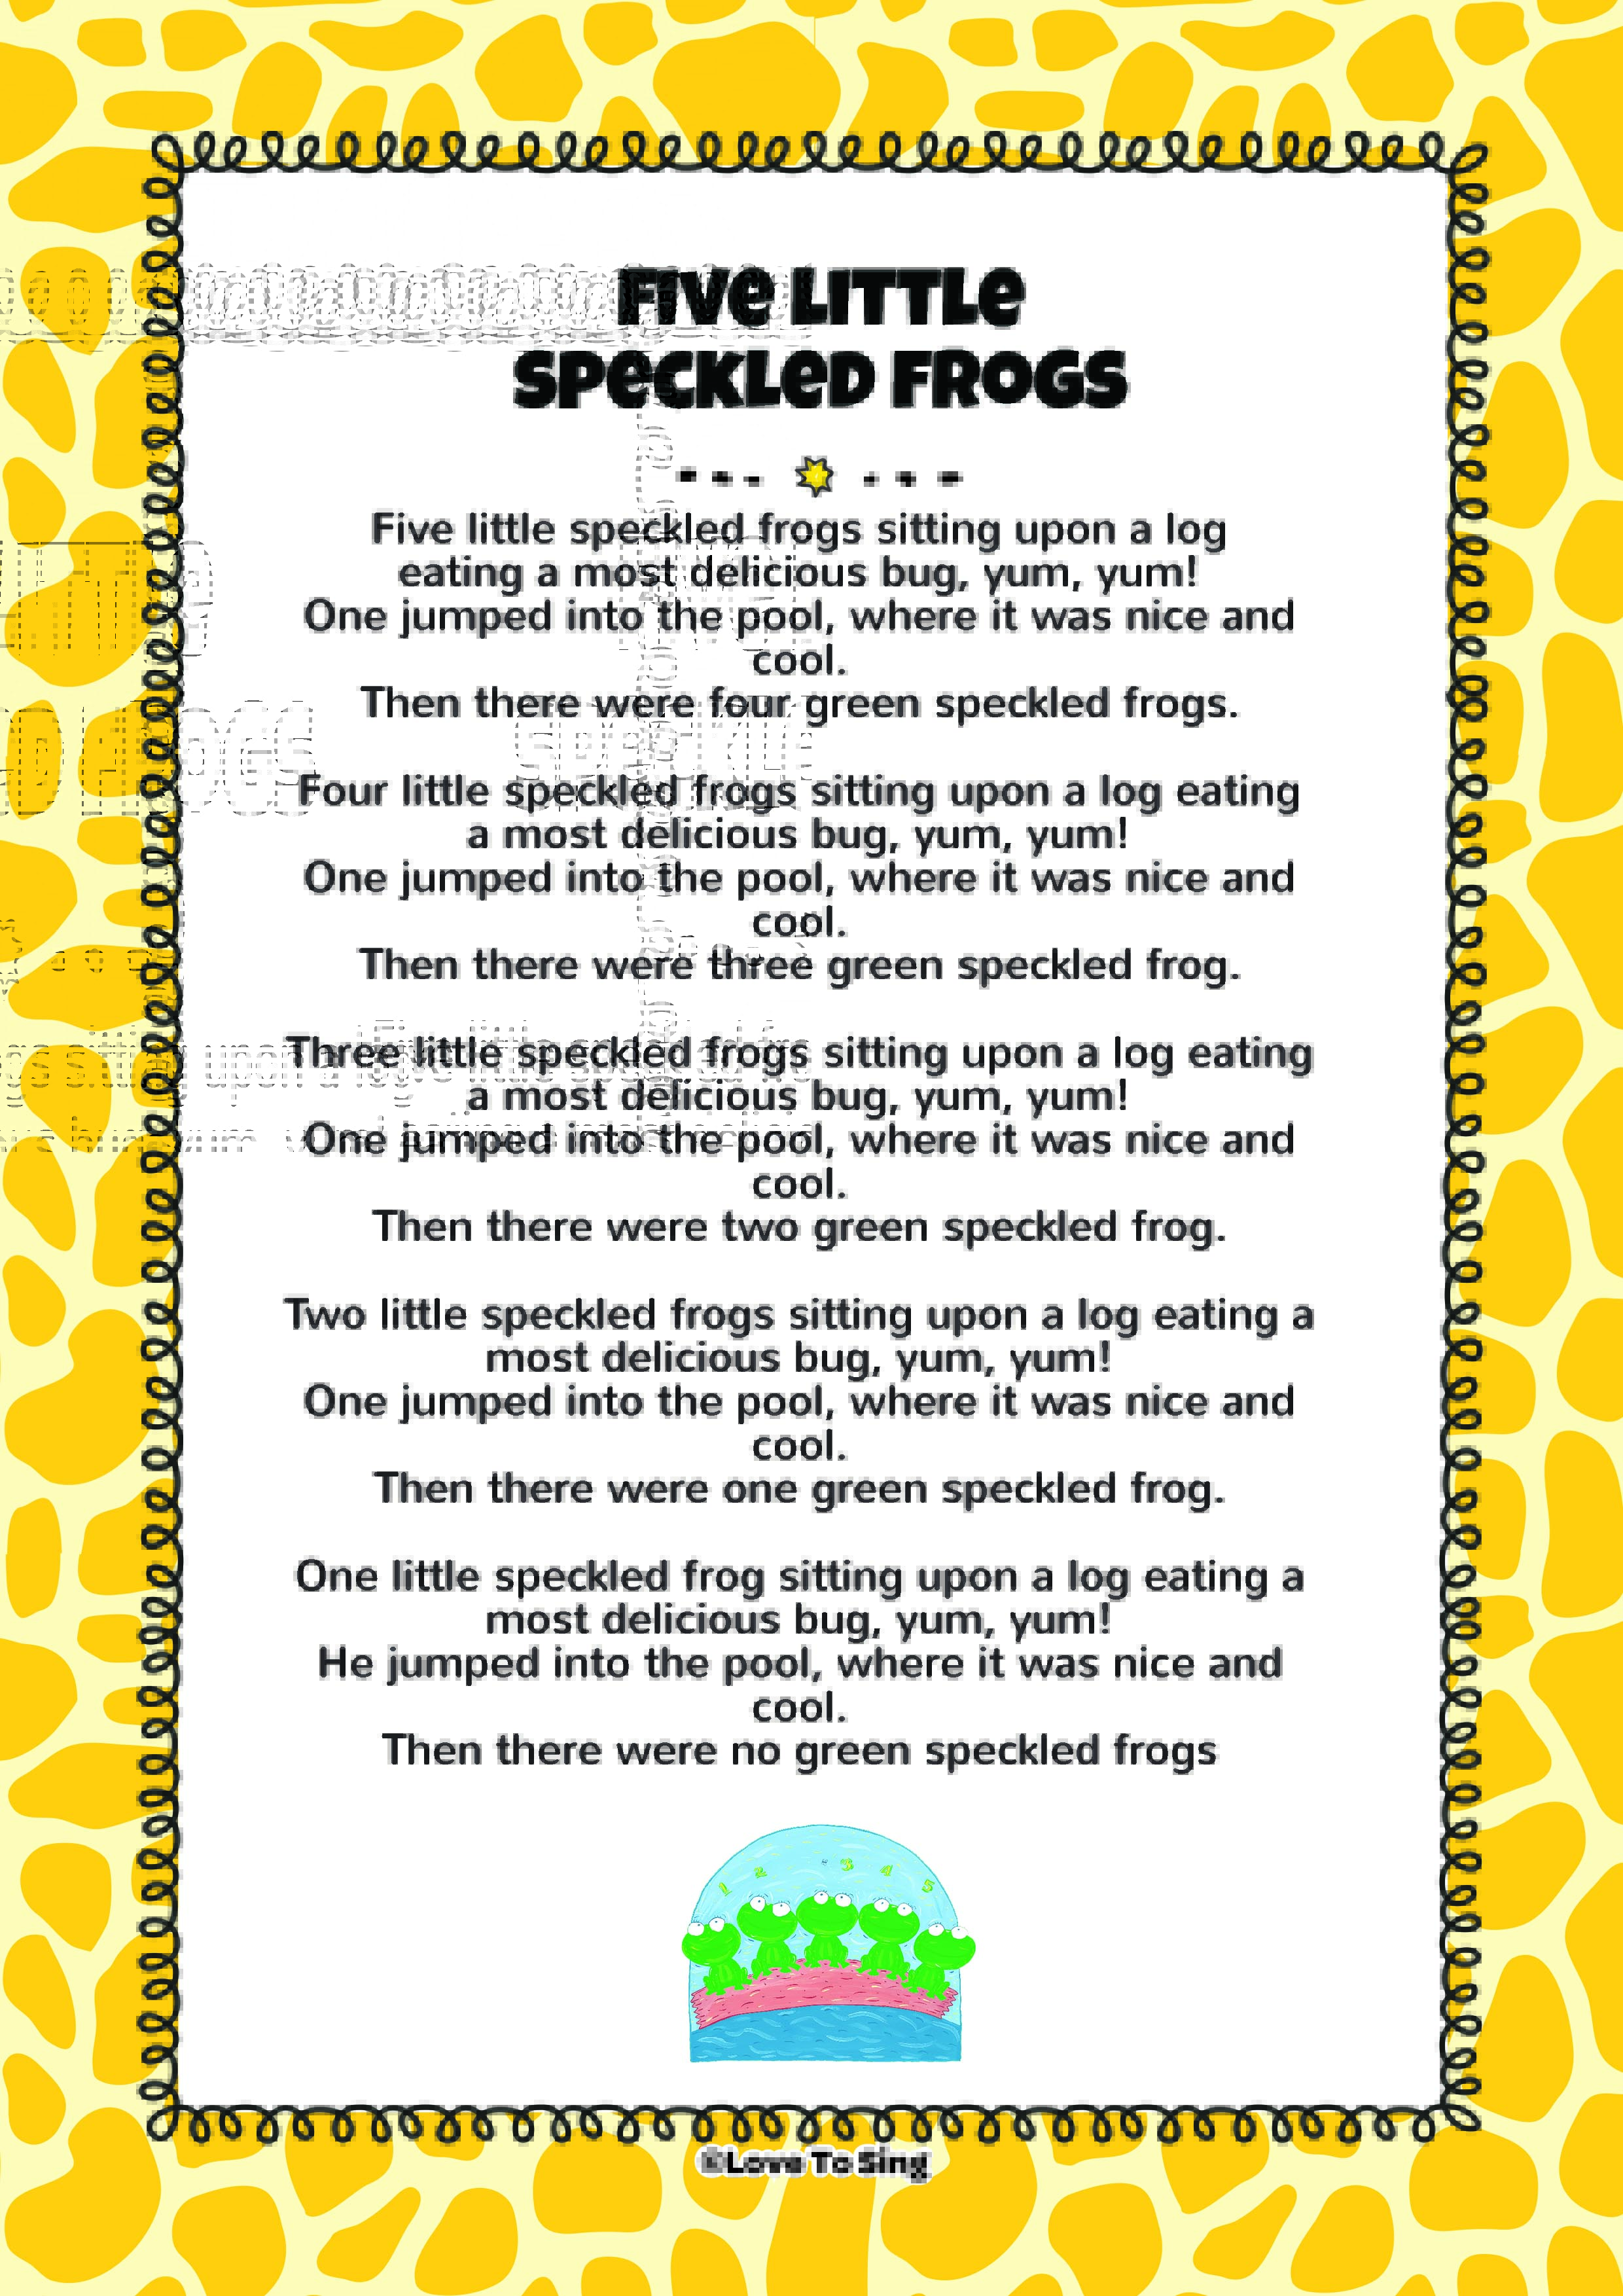 Five Little Speckled Frogs | FREE Video Song, Lyrics & Activities